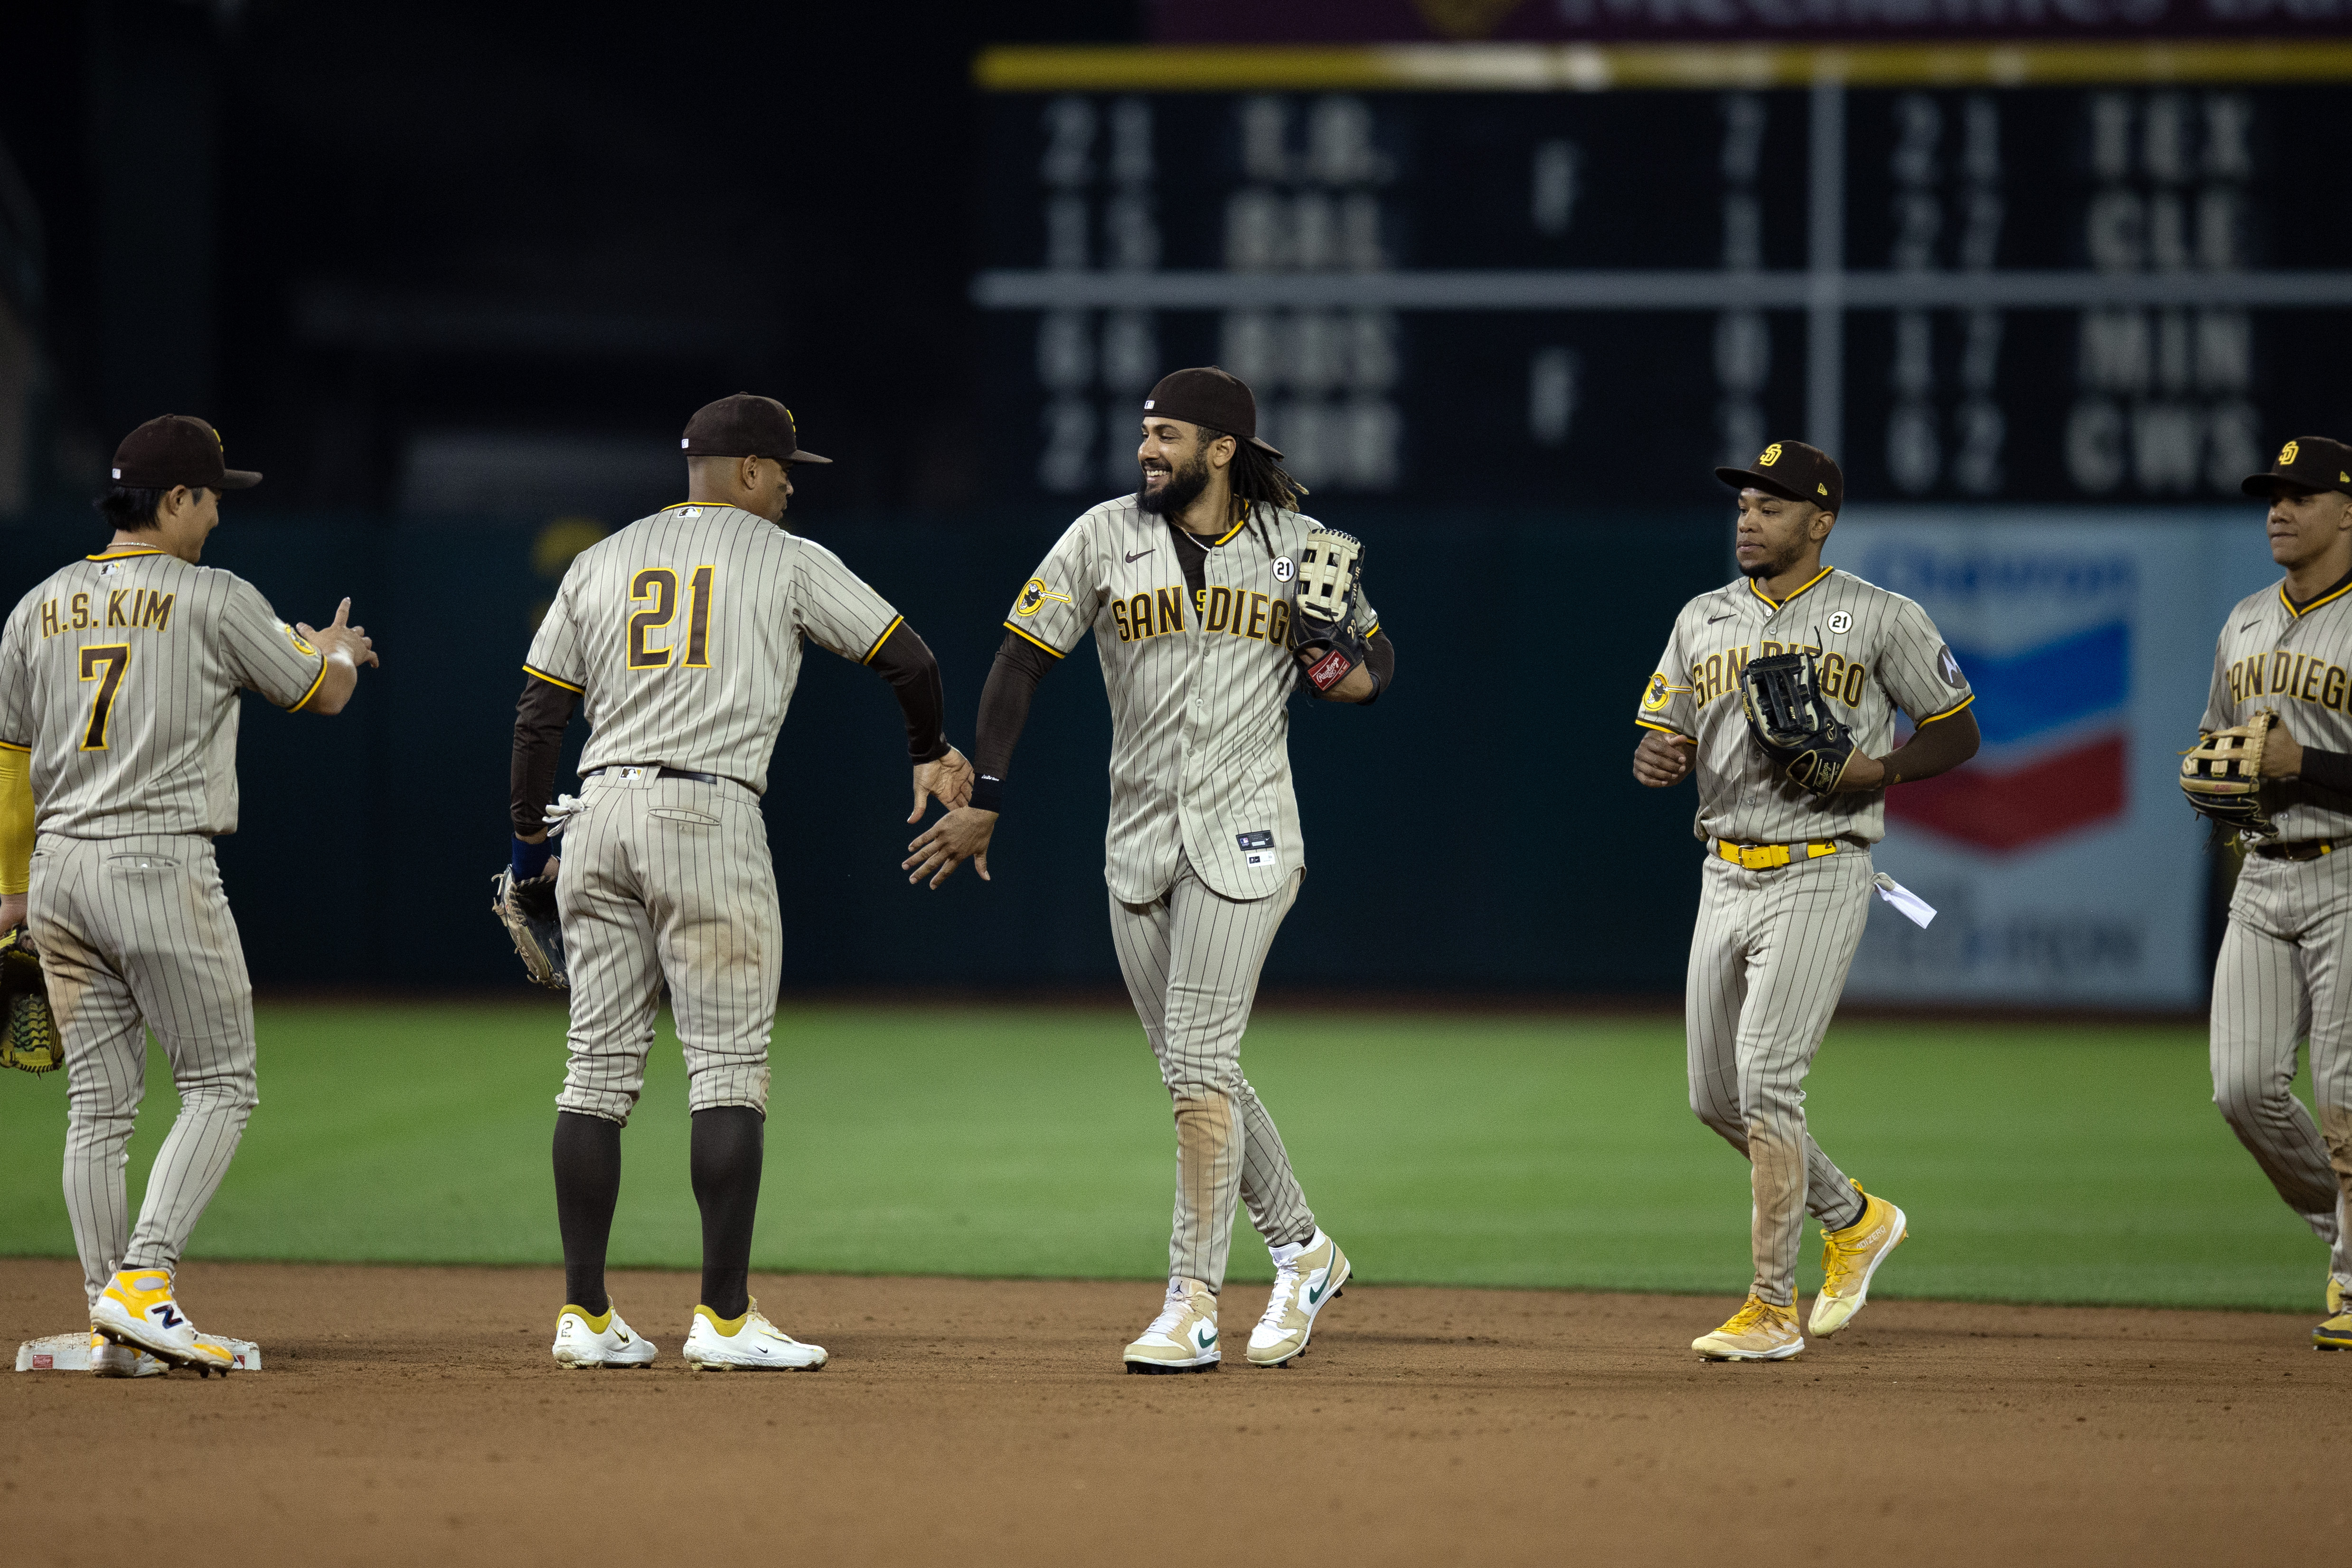 Bob Melvin returns to Oakland with Padres beating A's 8-3 - Sactown Sports